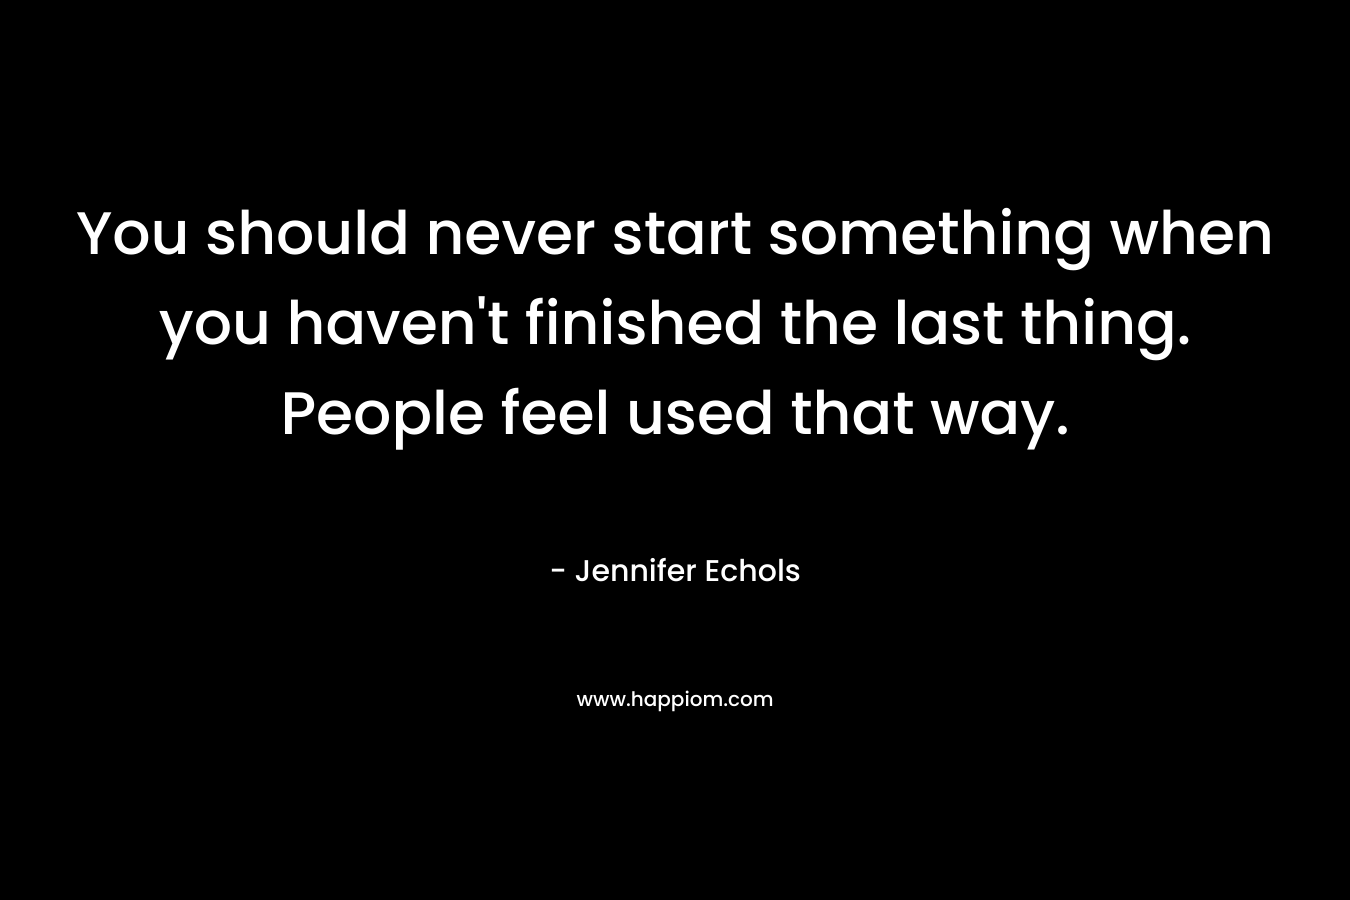 You should never start something when you haven't finished the last thing. People feel used that way.